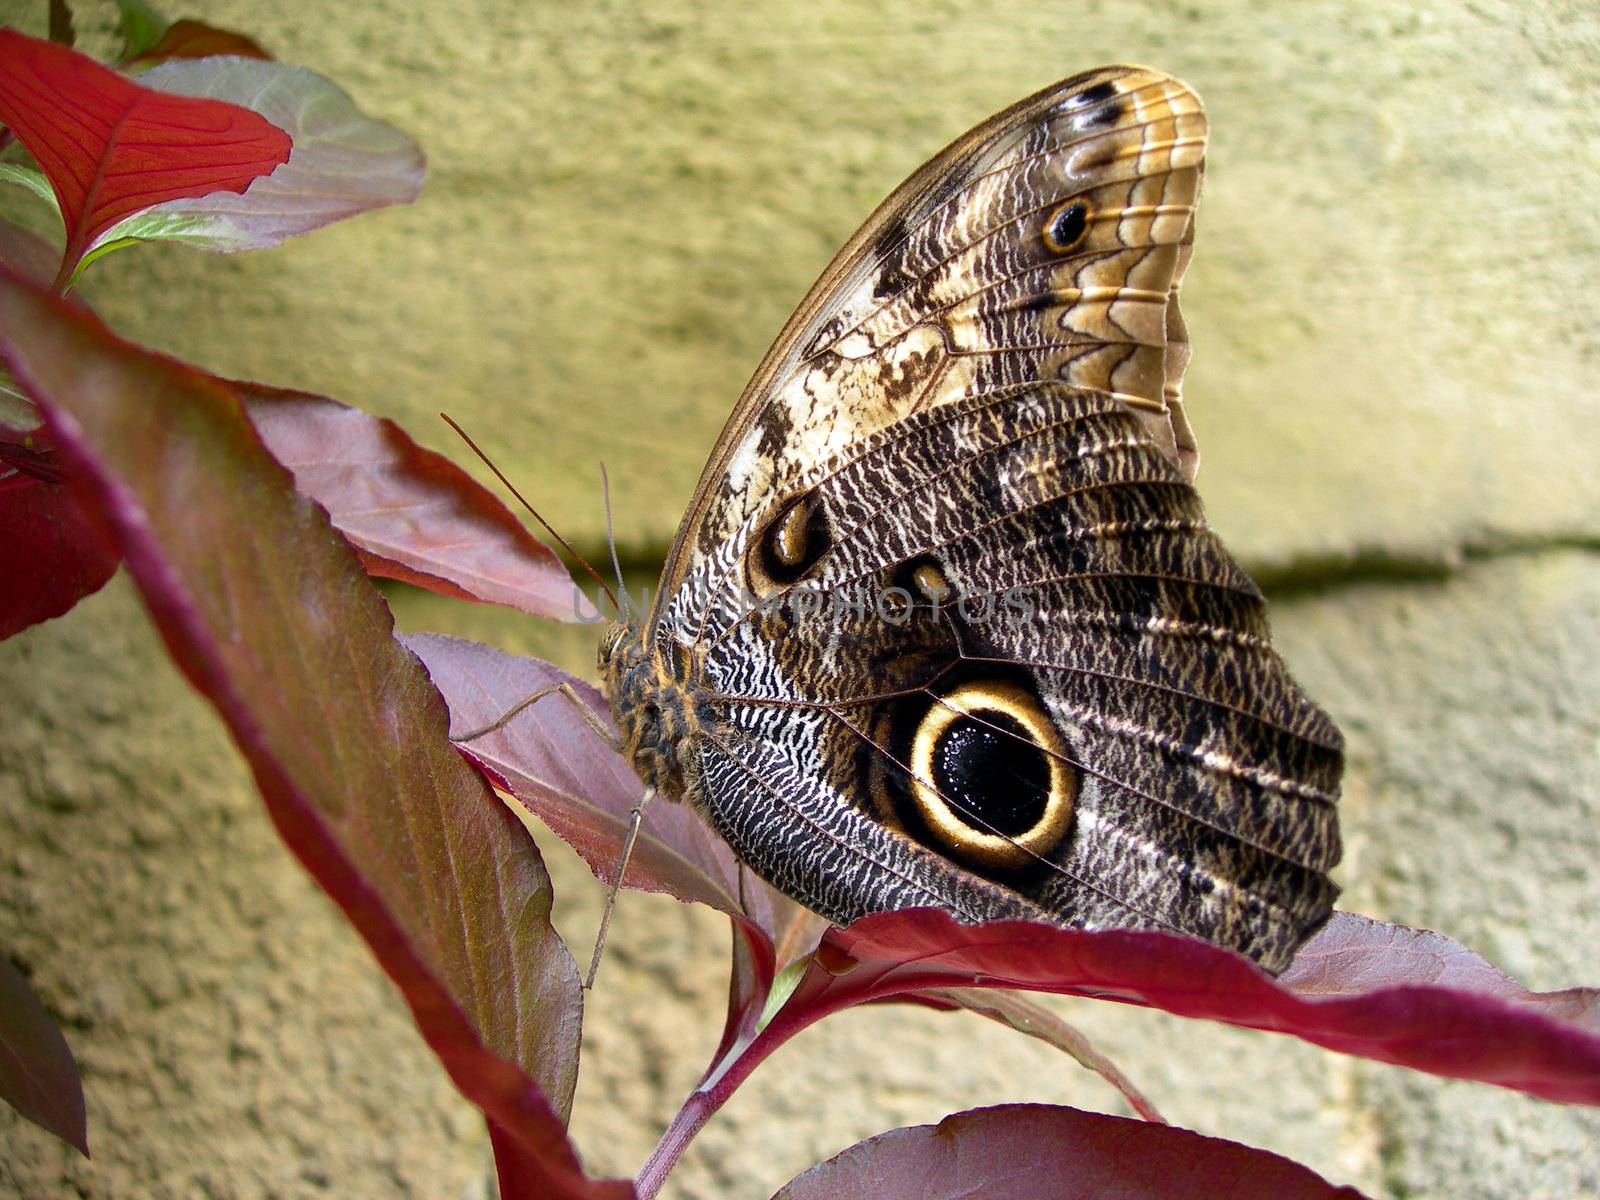           Tropical butterfly is sitting on a red leaf